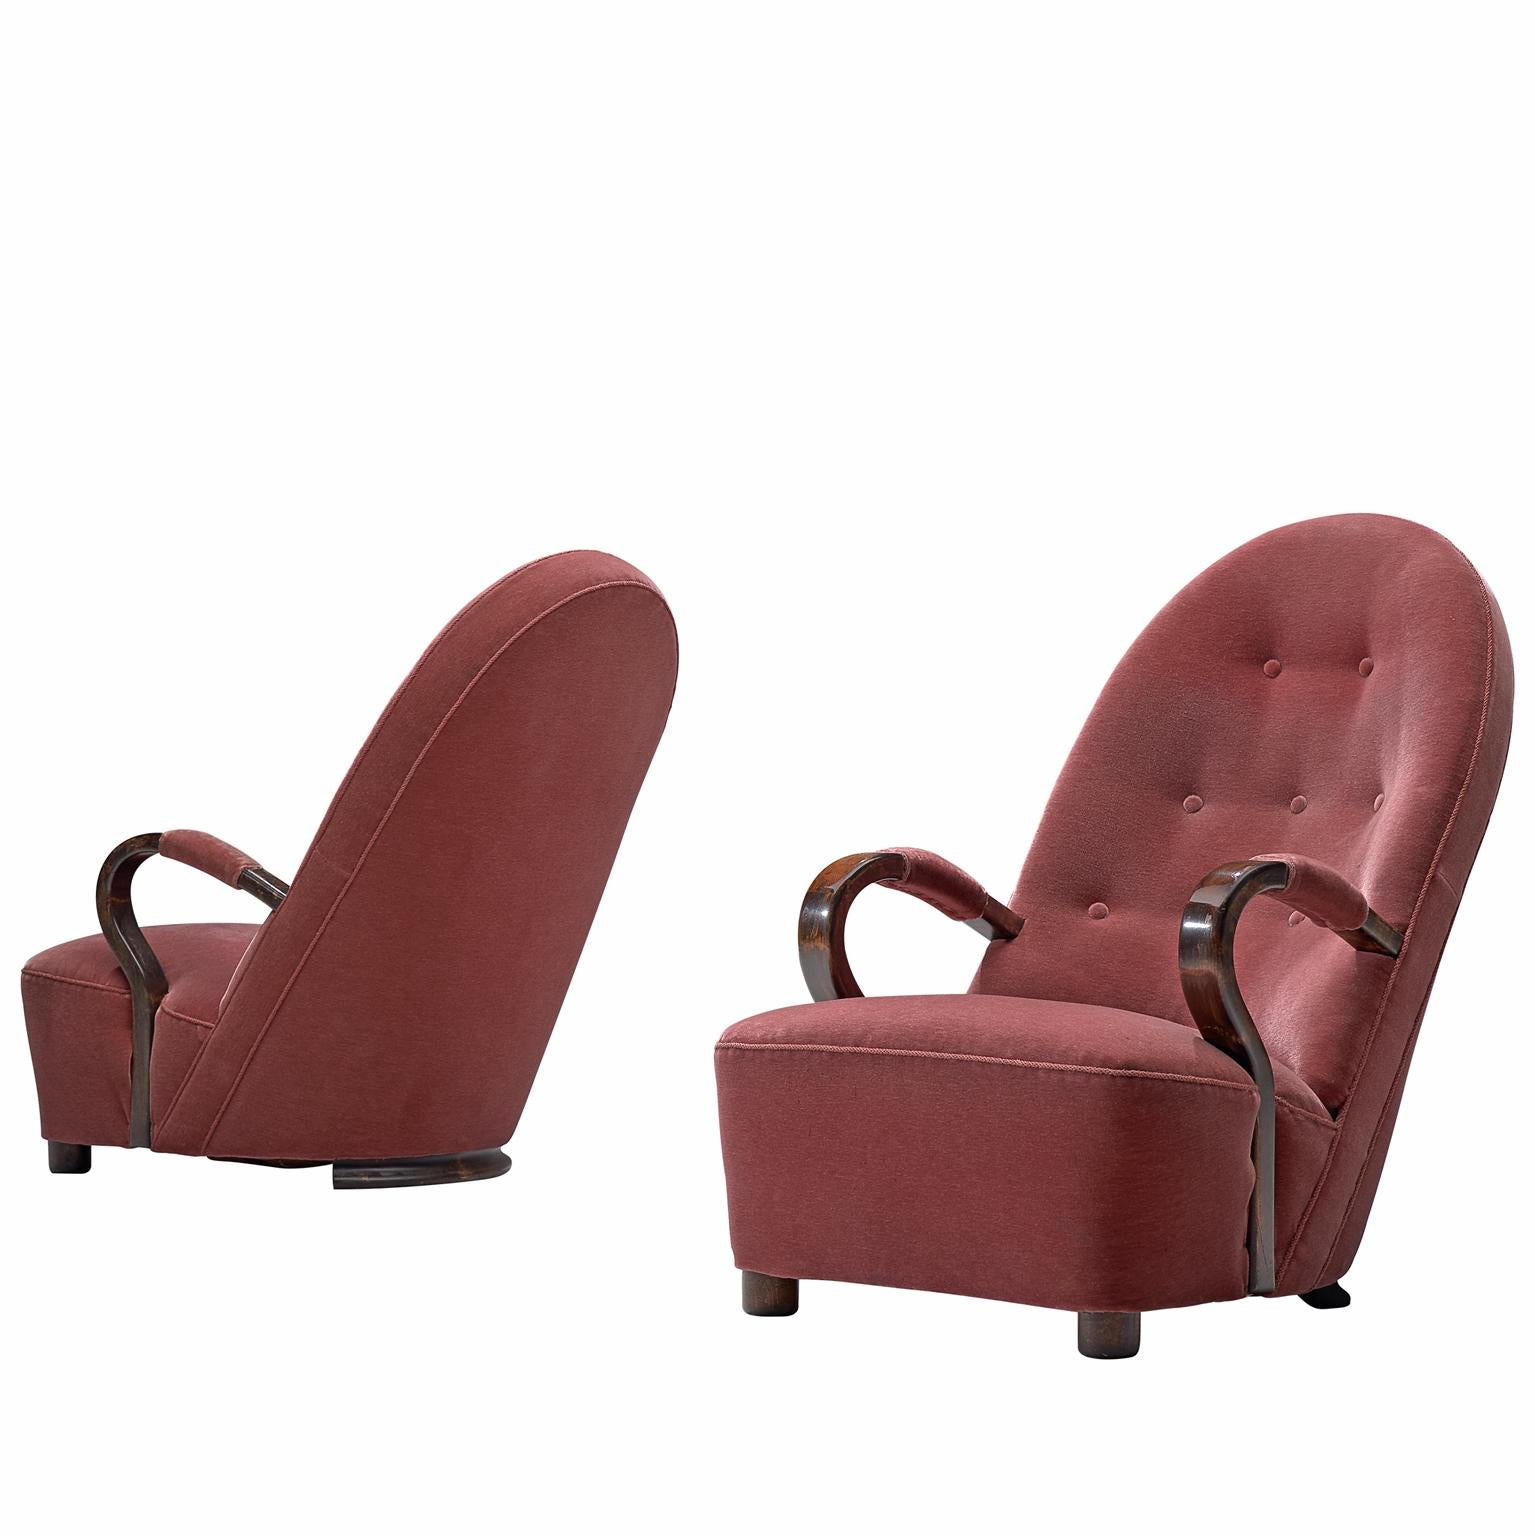 Art Deco Lounge Chairs with Red Upholstery